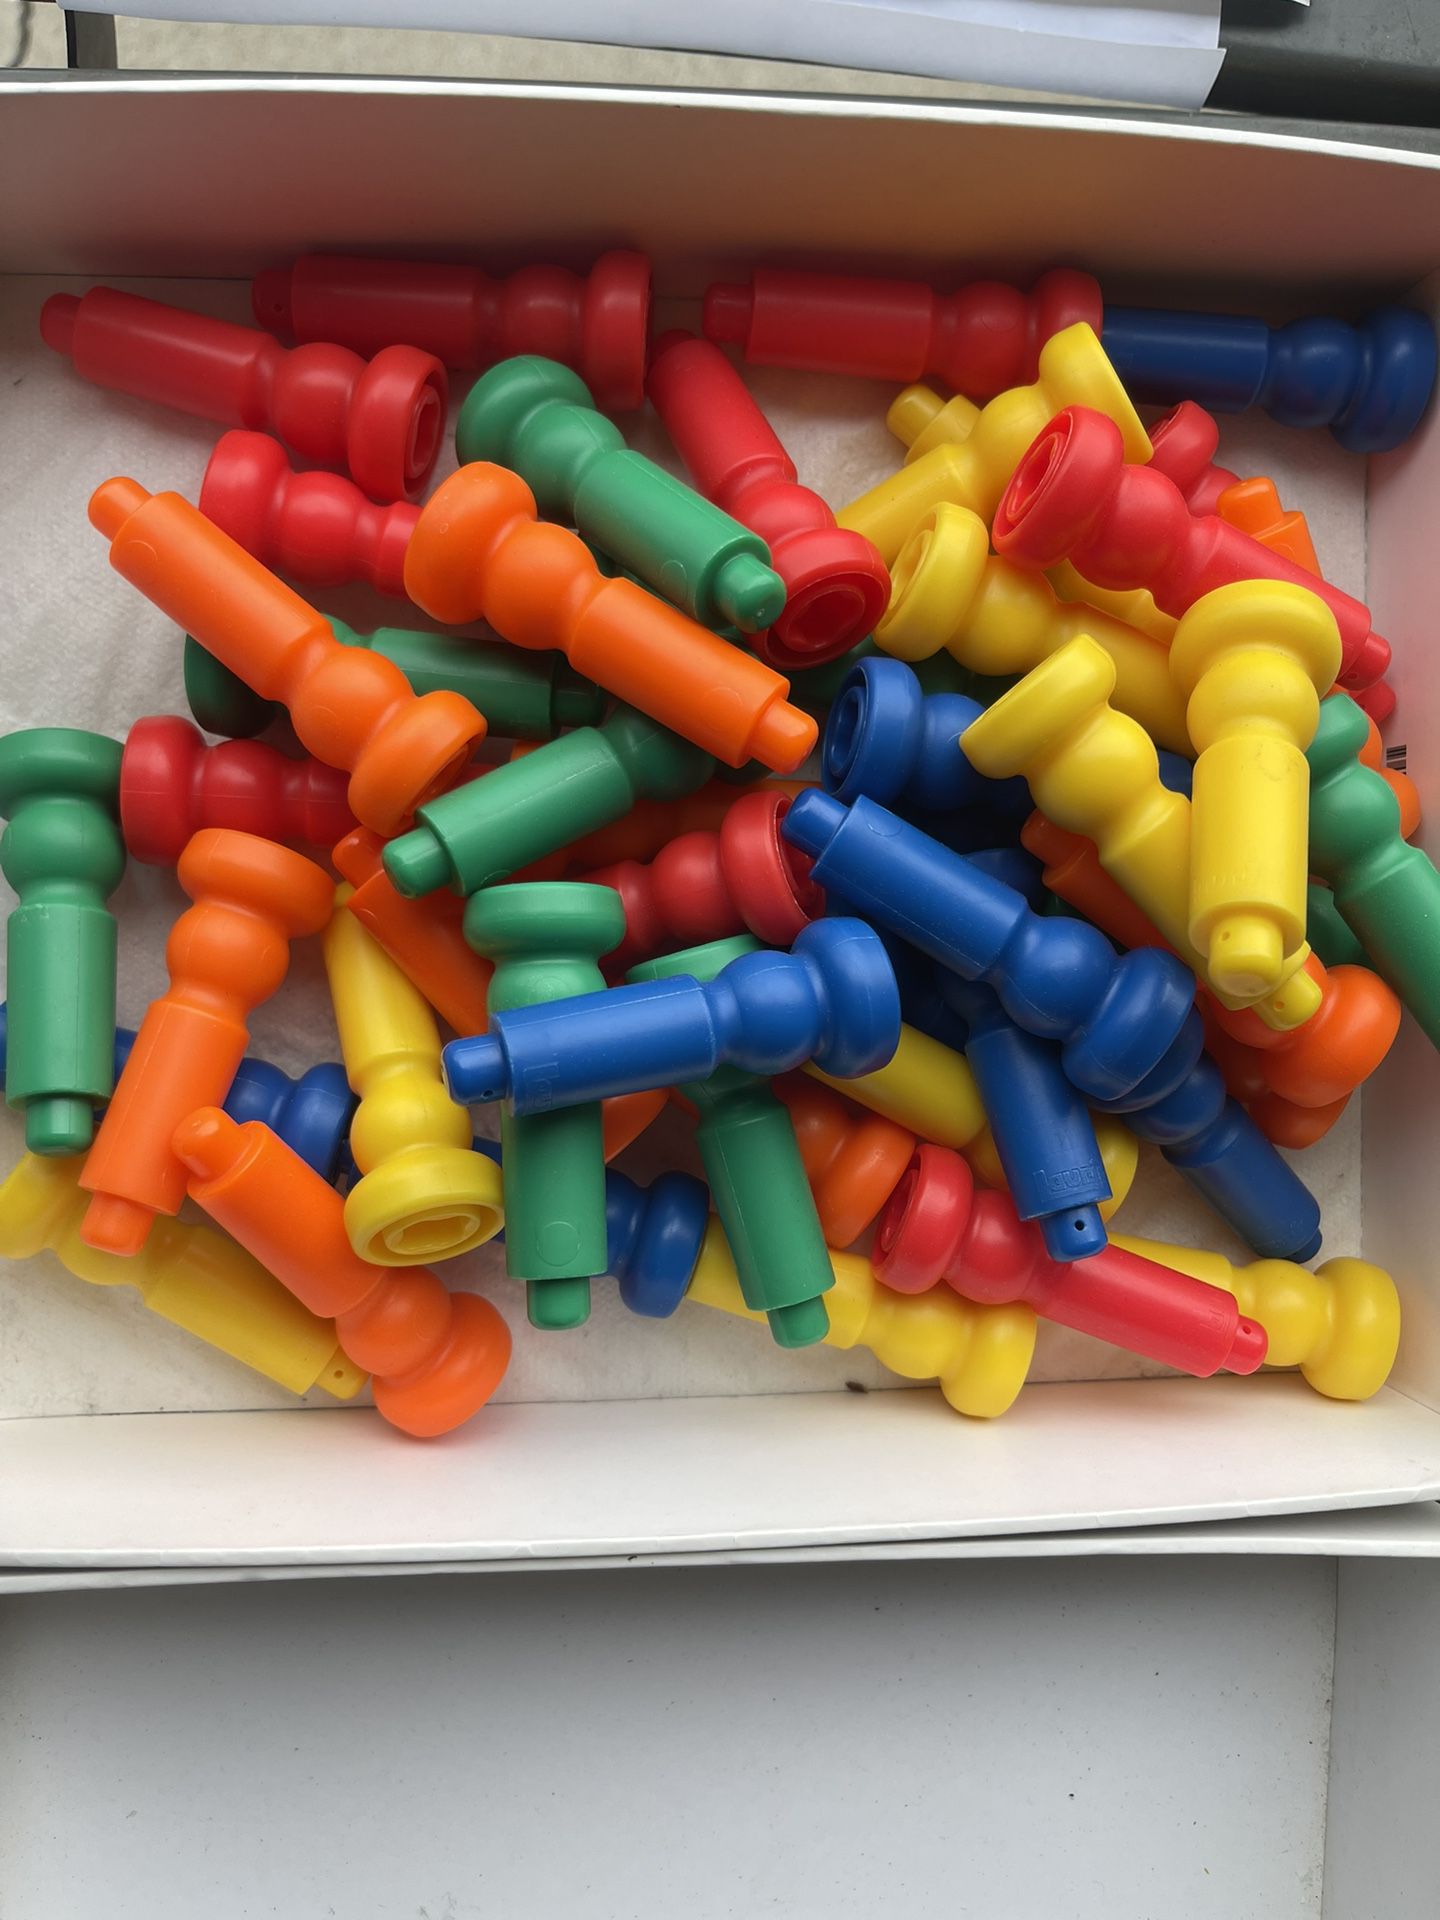 Puzzle Lot of 48 Plastic Pegs Multi Colored Pegs For Puzzles Child Play